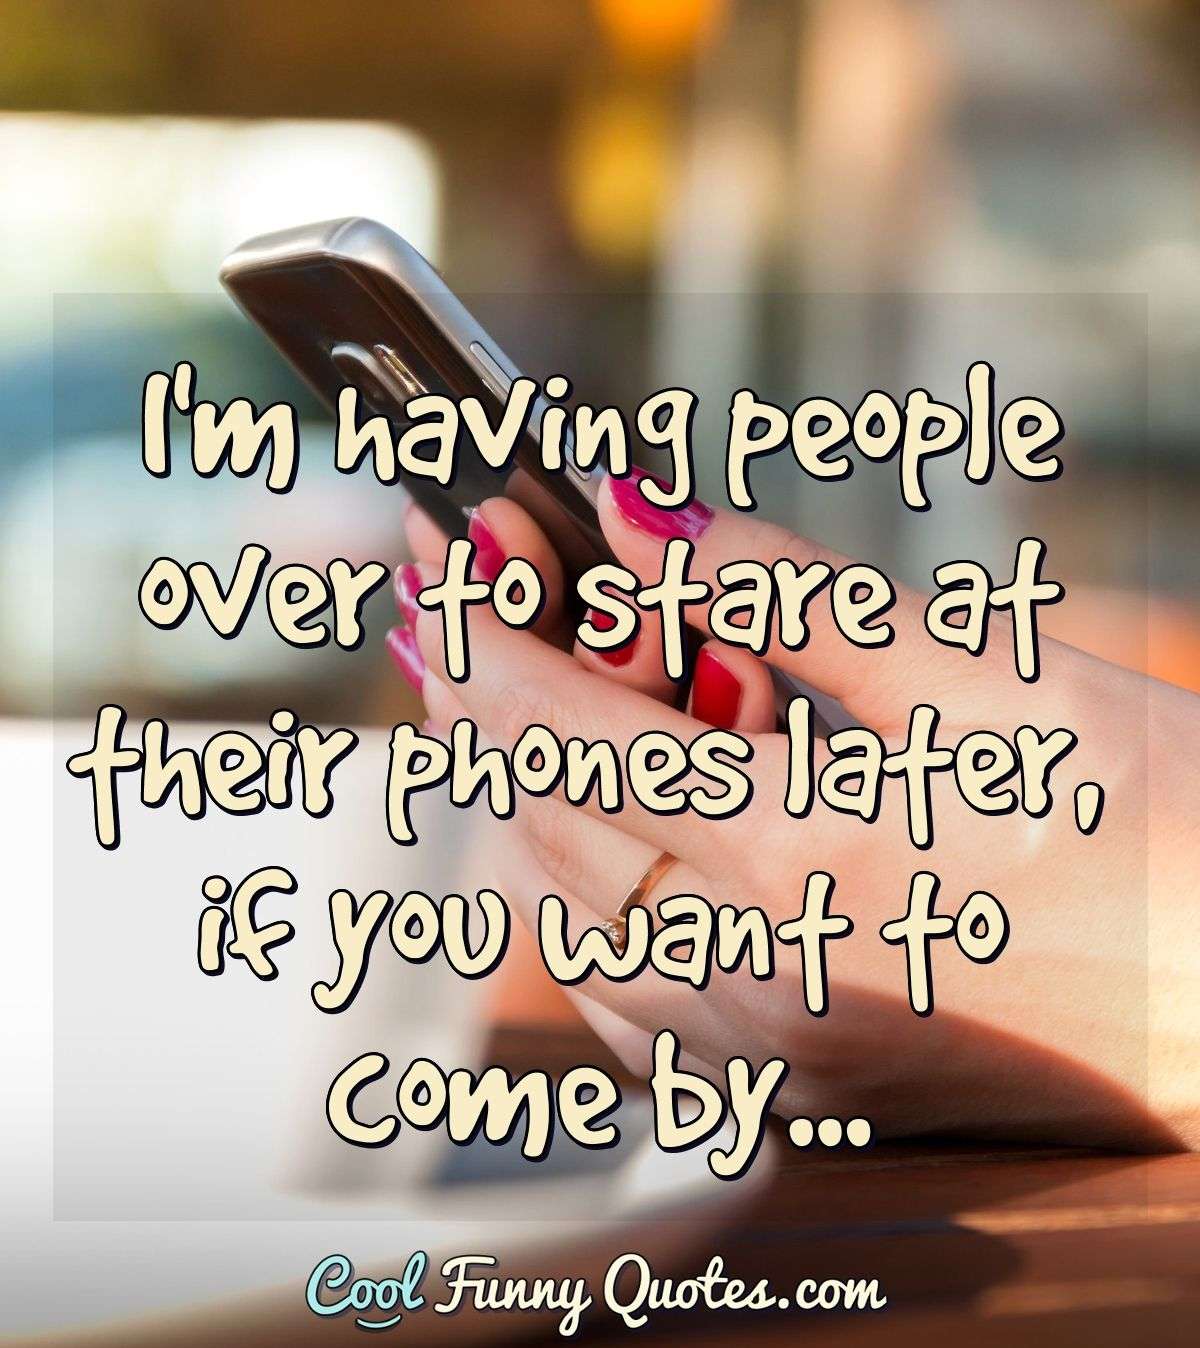 I'm having people over to stare at their phones later, if you want to come by... - Anonymous